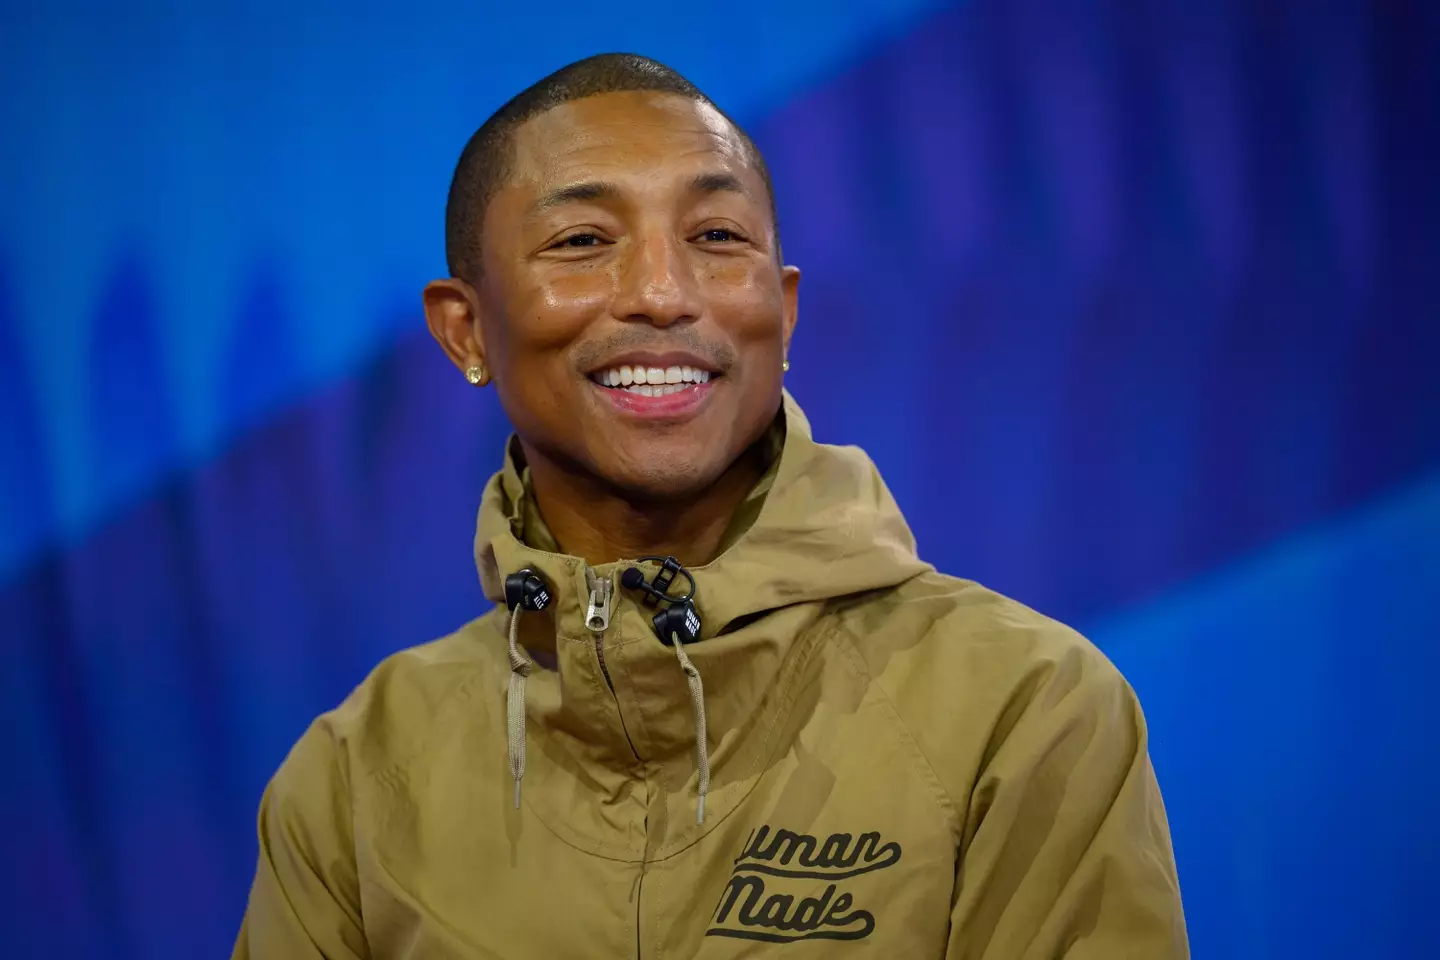 Pharrell Williams has reportedly had a lawsuit filed against him by Pink. (Nathan Congleton/NBC via Getty Images)